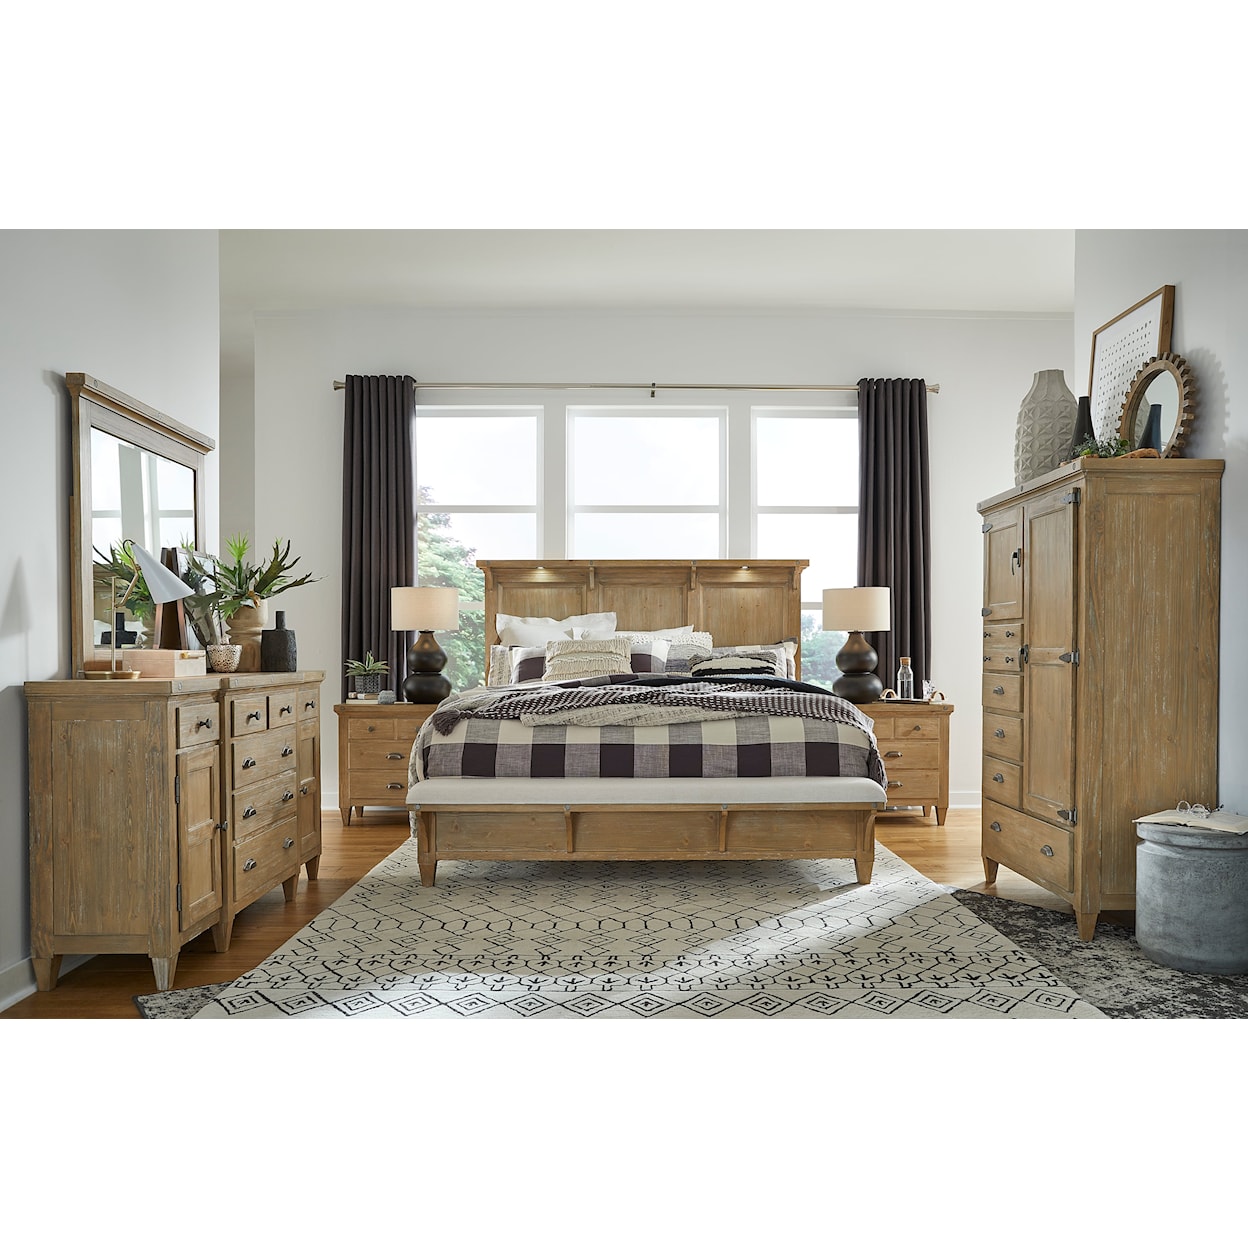 Magnussen Home Lynnfield Bedroom King Lighted Panel Bed with Bench